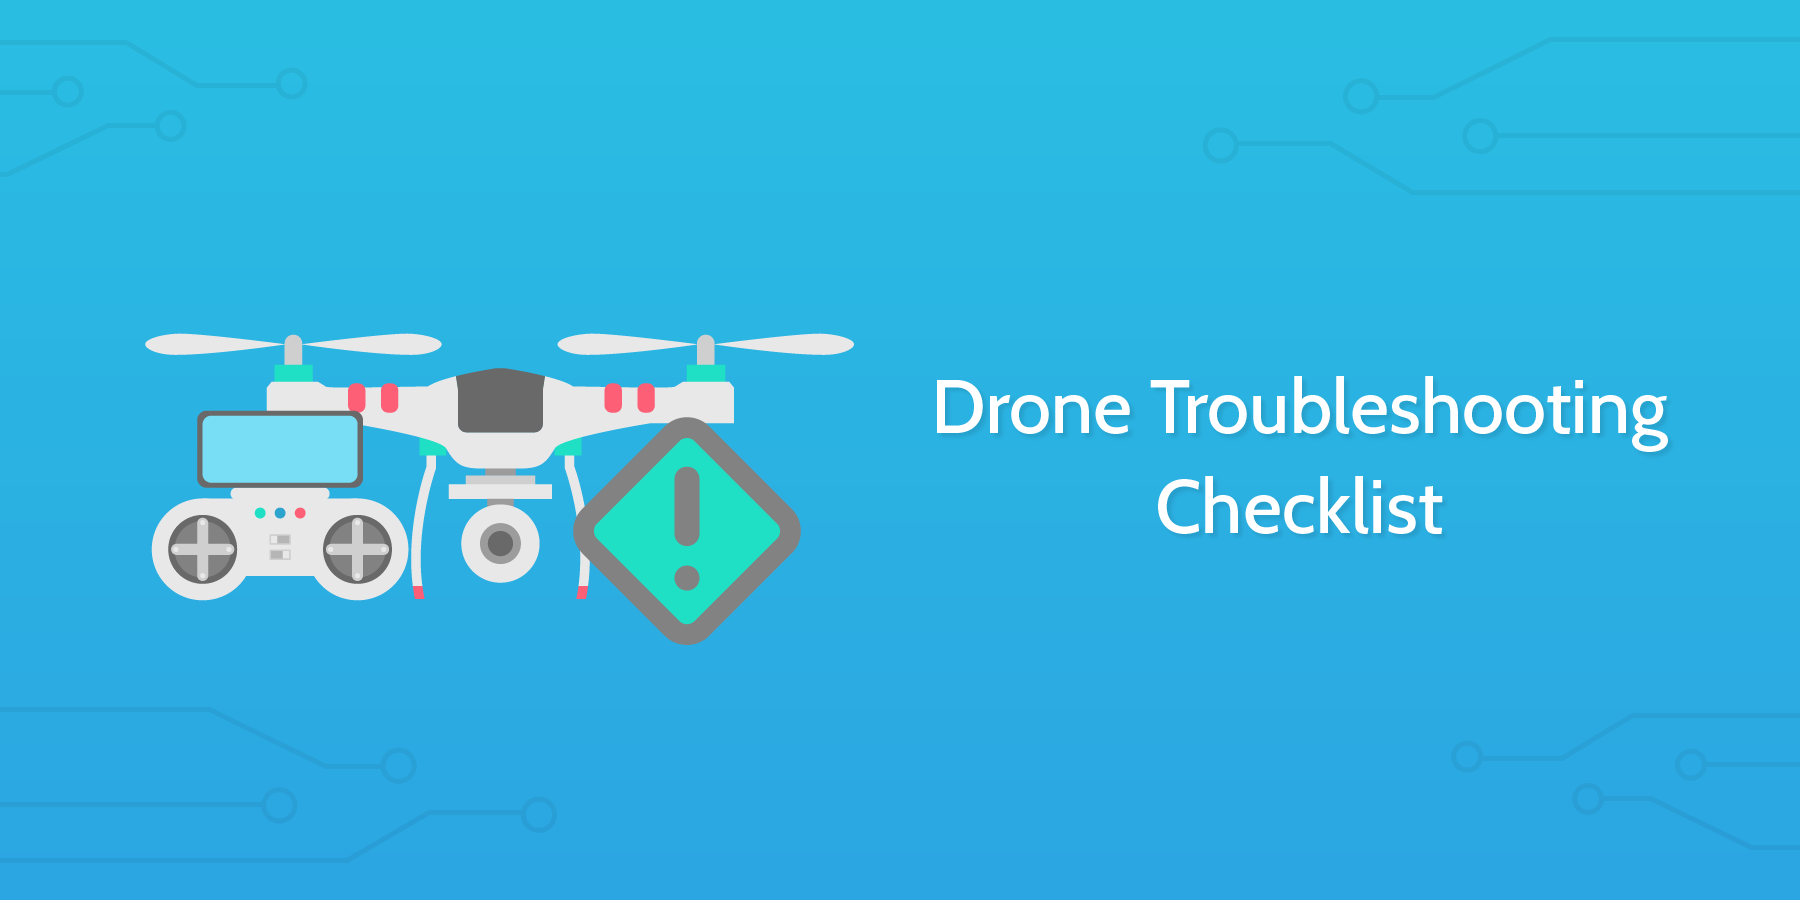 Drone Troubleshooting Checklist